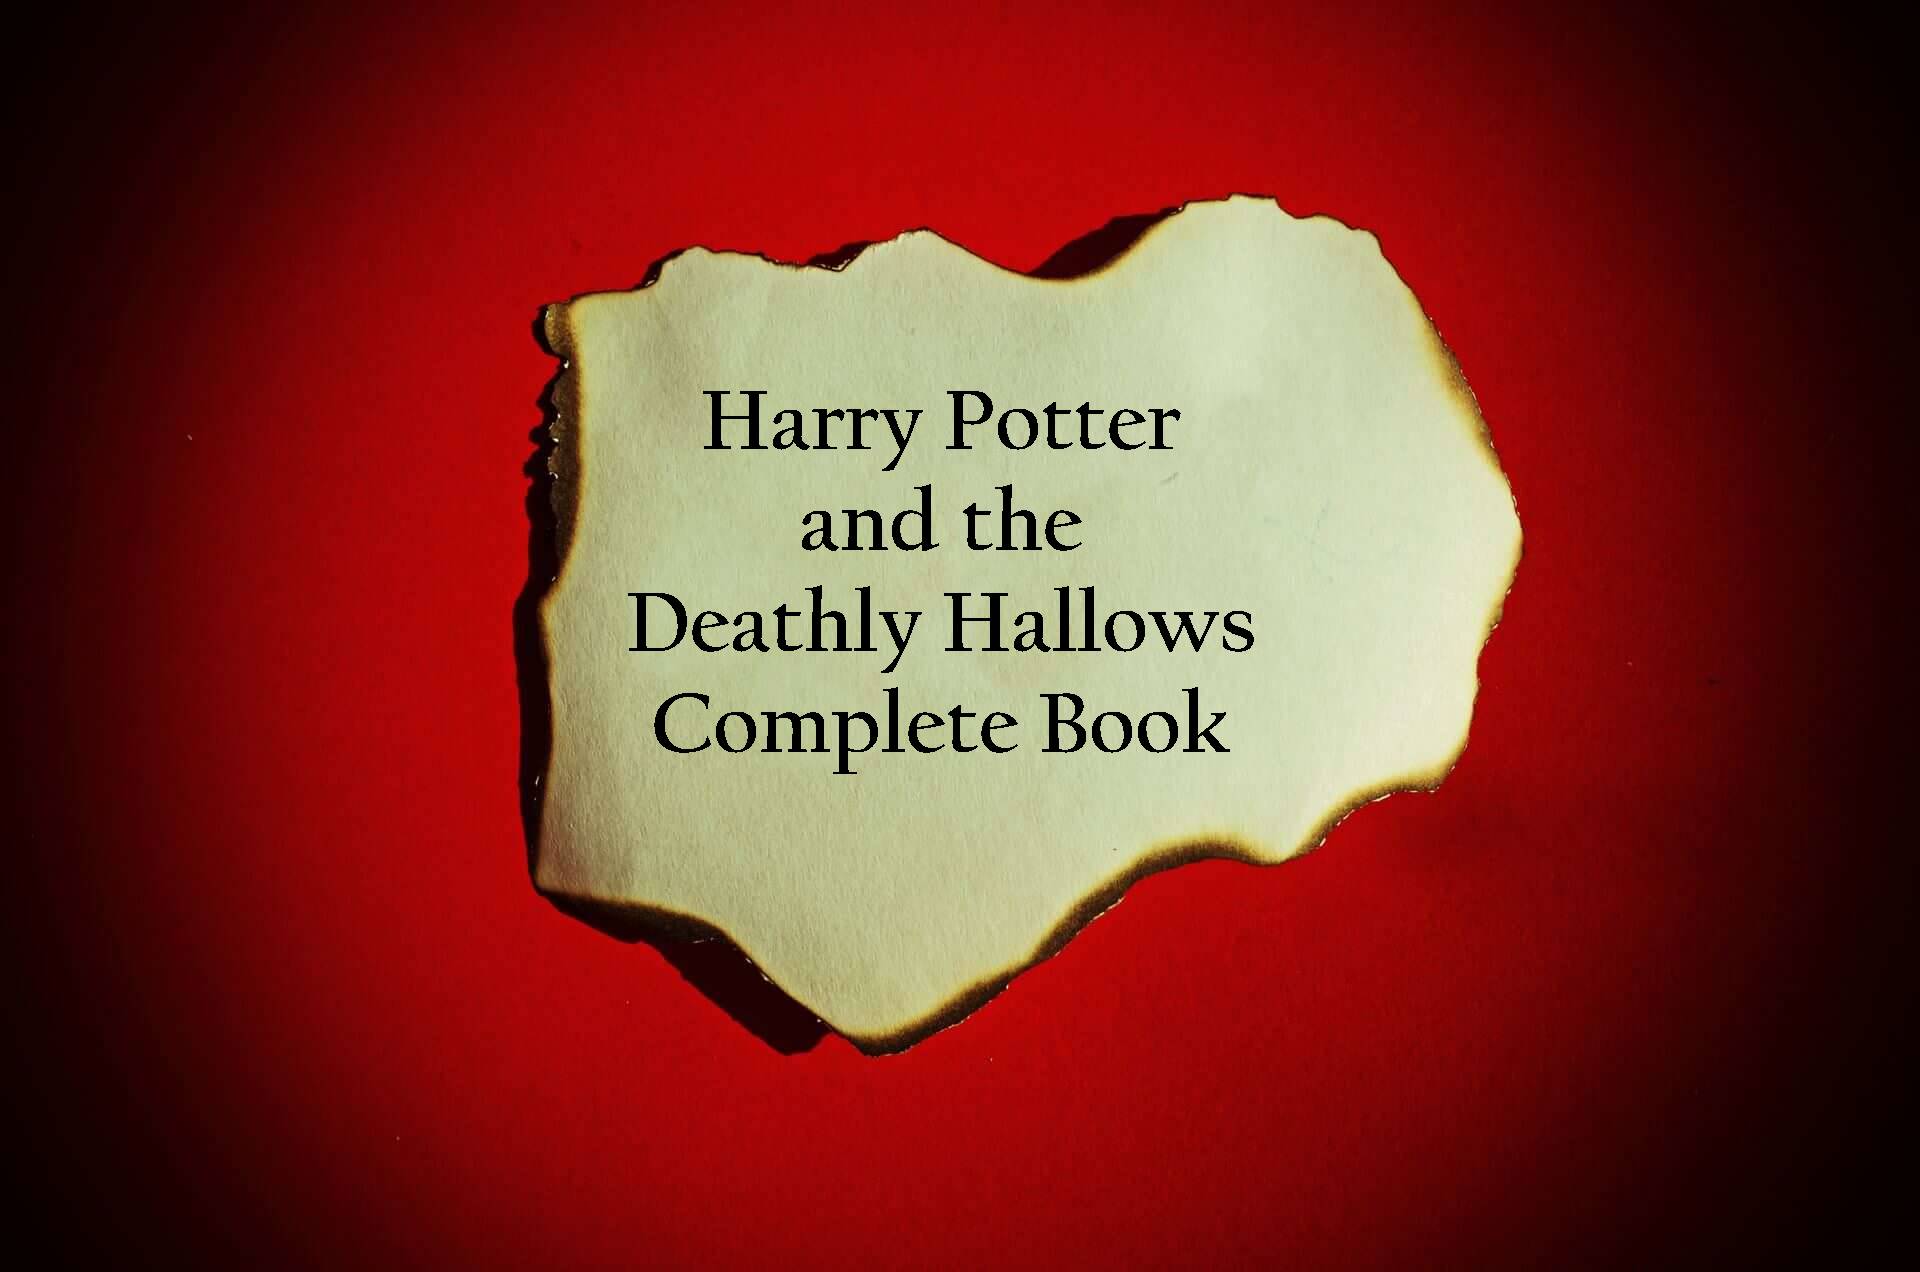 harry potter and the deathly hallows audiobook jim dale preface